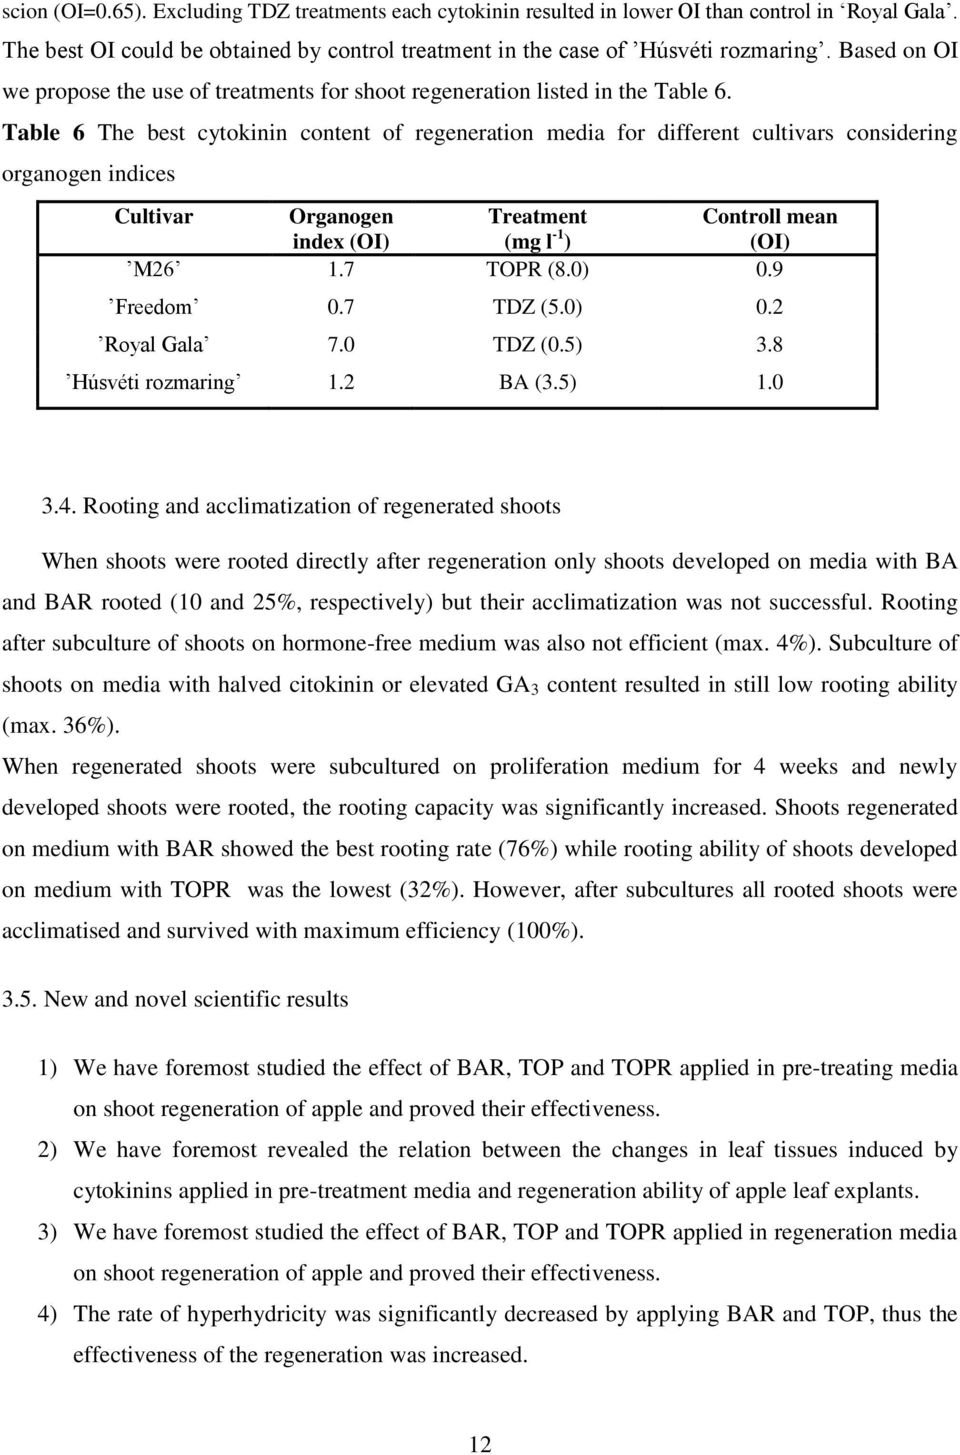 Table 6 The best cytokinin content of regeneration media for different cultivars considering organogen indices Cultivar Organogen Treatment Controll mean index (OI) (mg l -1 ) (OI) M26 1.7 TOPR (8.